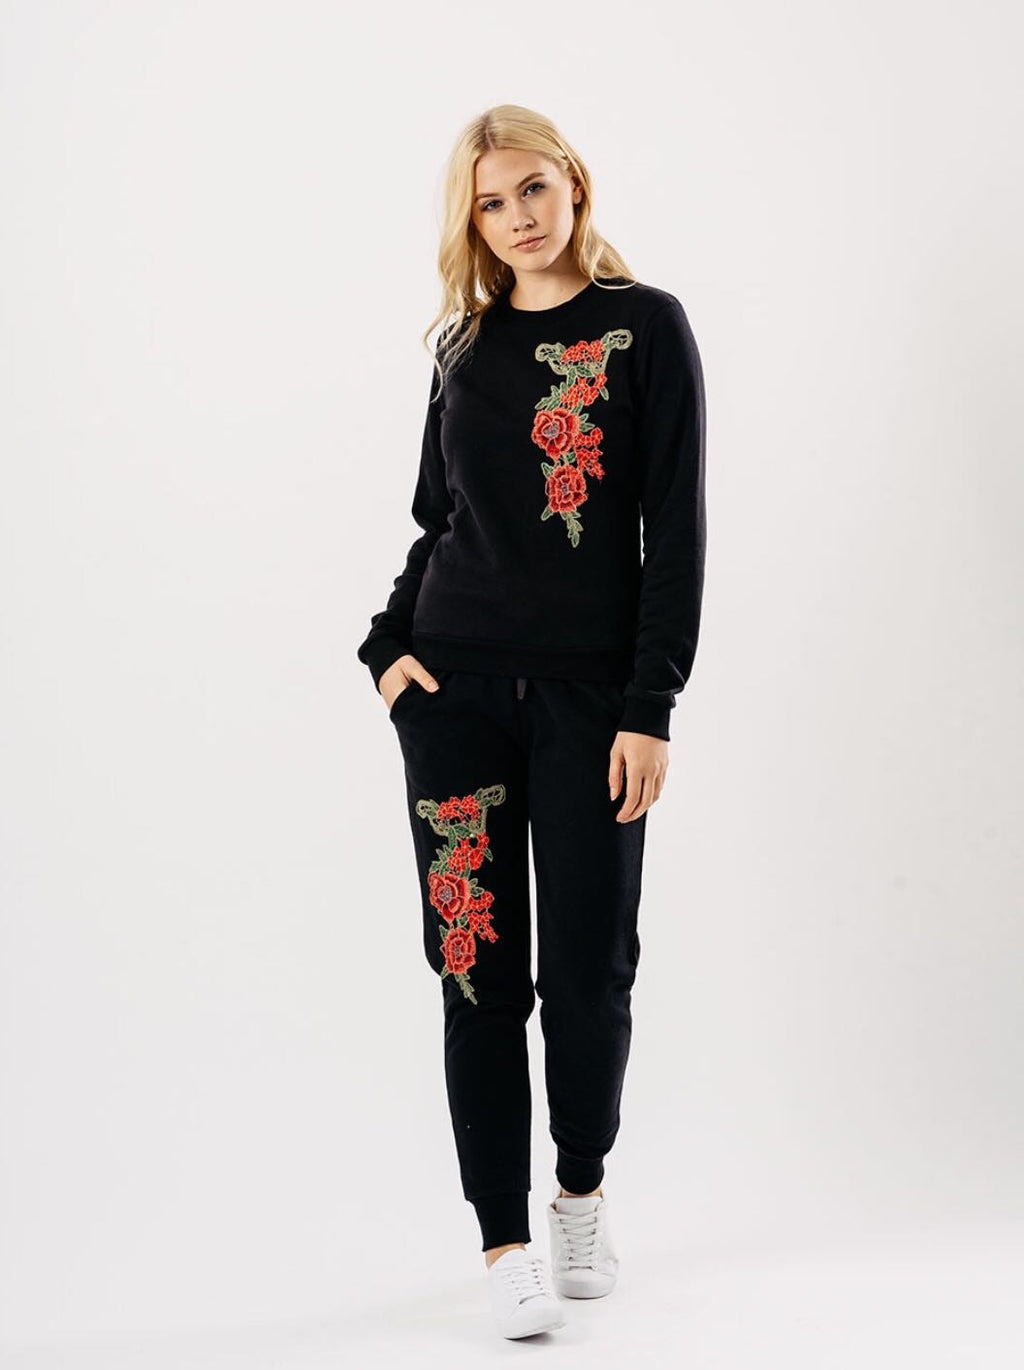 Embroidered Loungewear Suit Sets